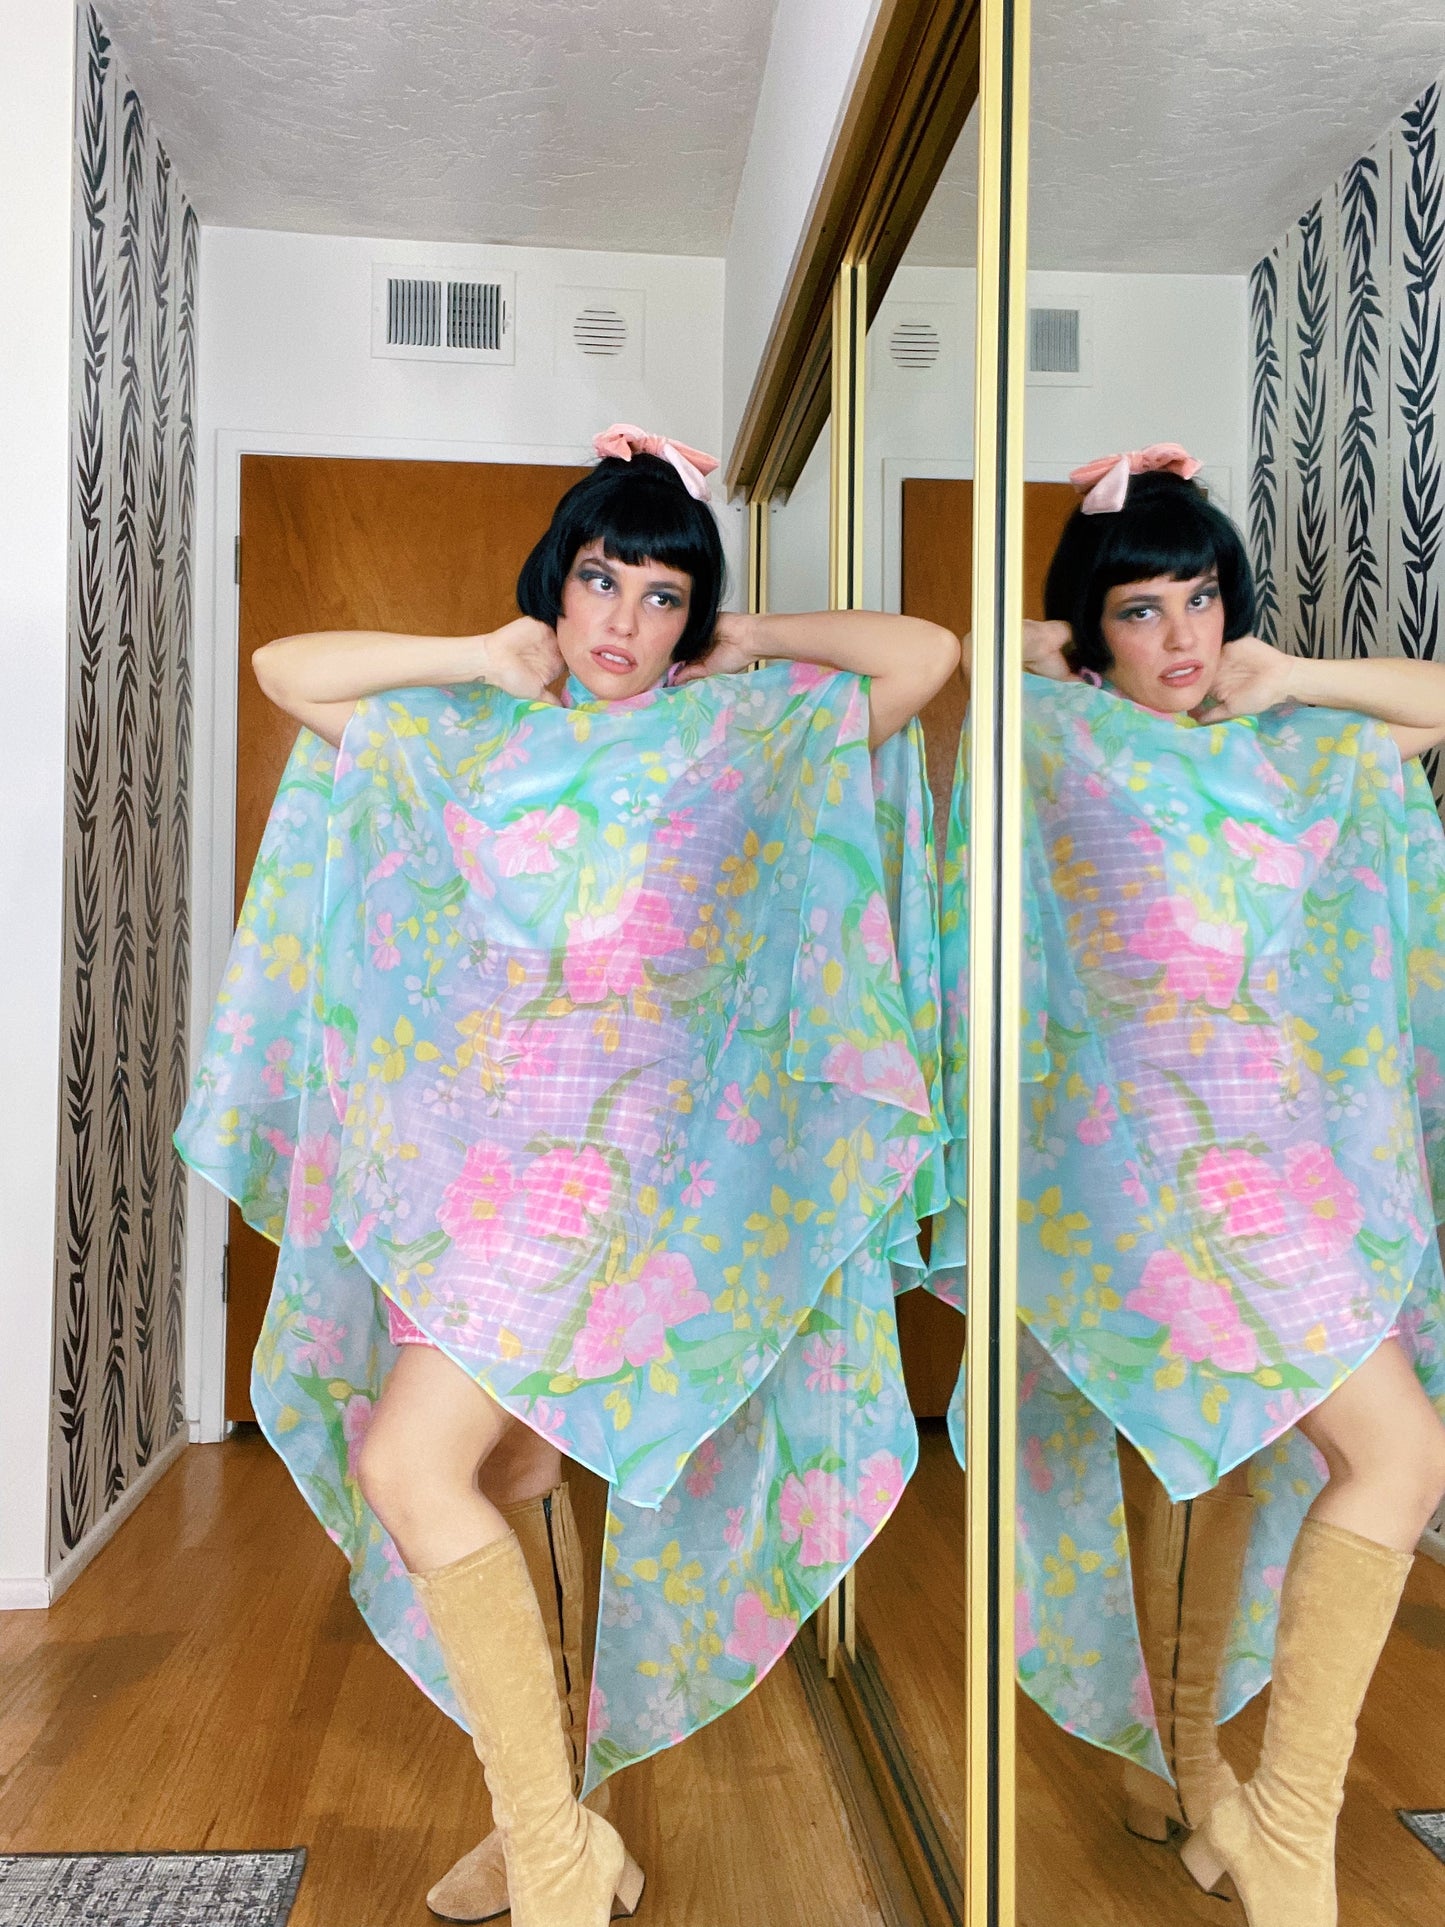 Vintage 60s / 70s Sheer Neon Floral Cape Dress Fits One Size